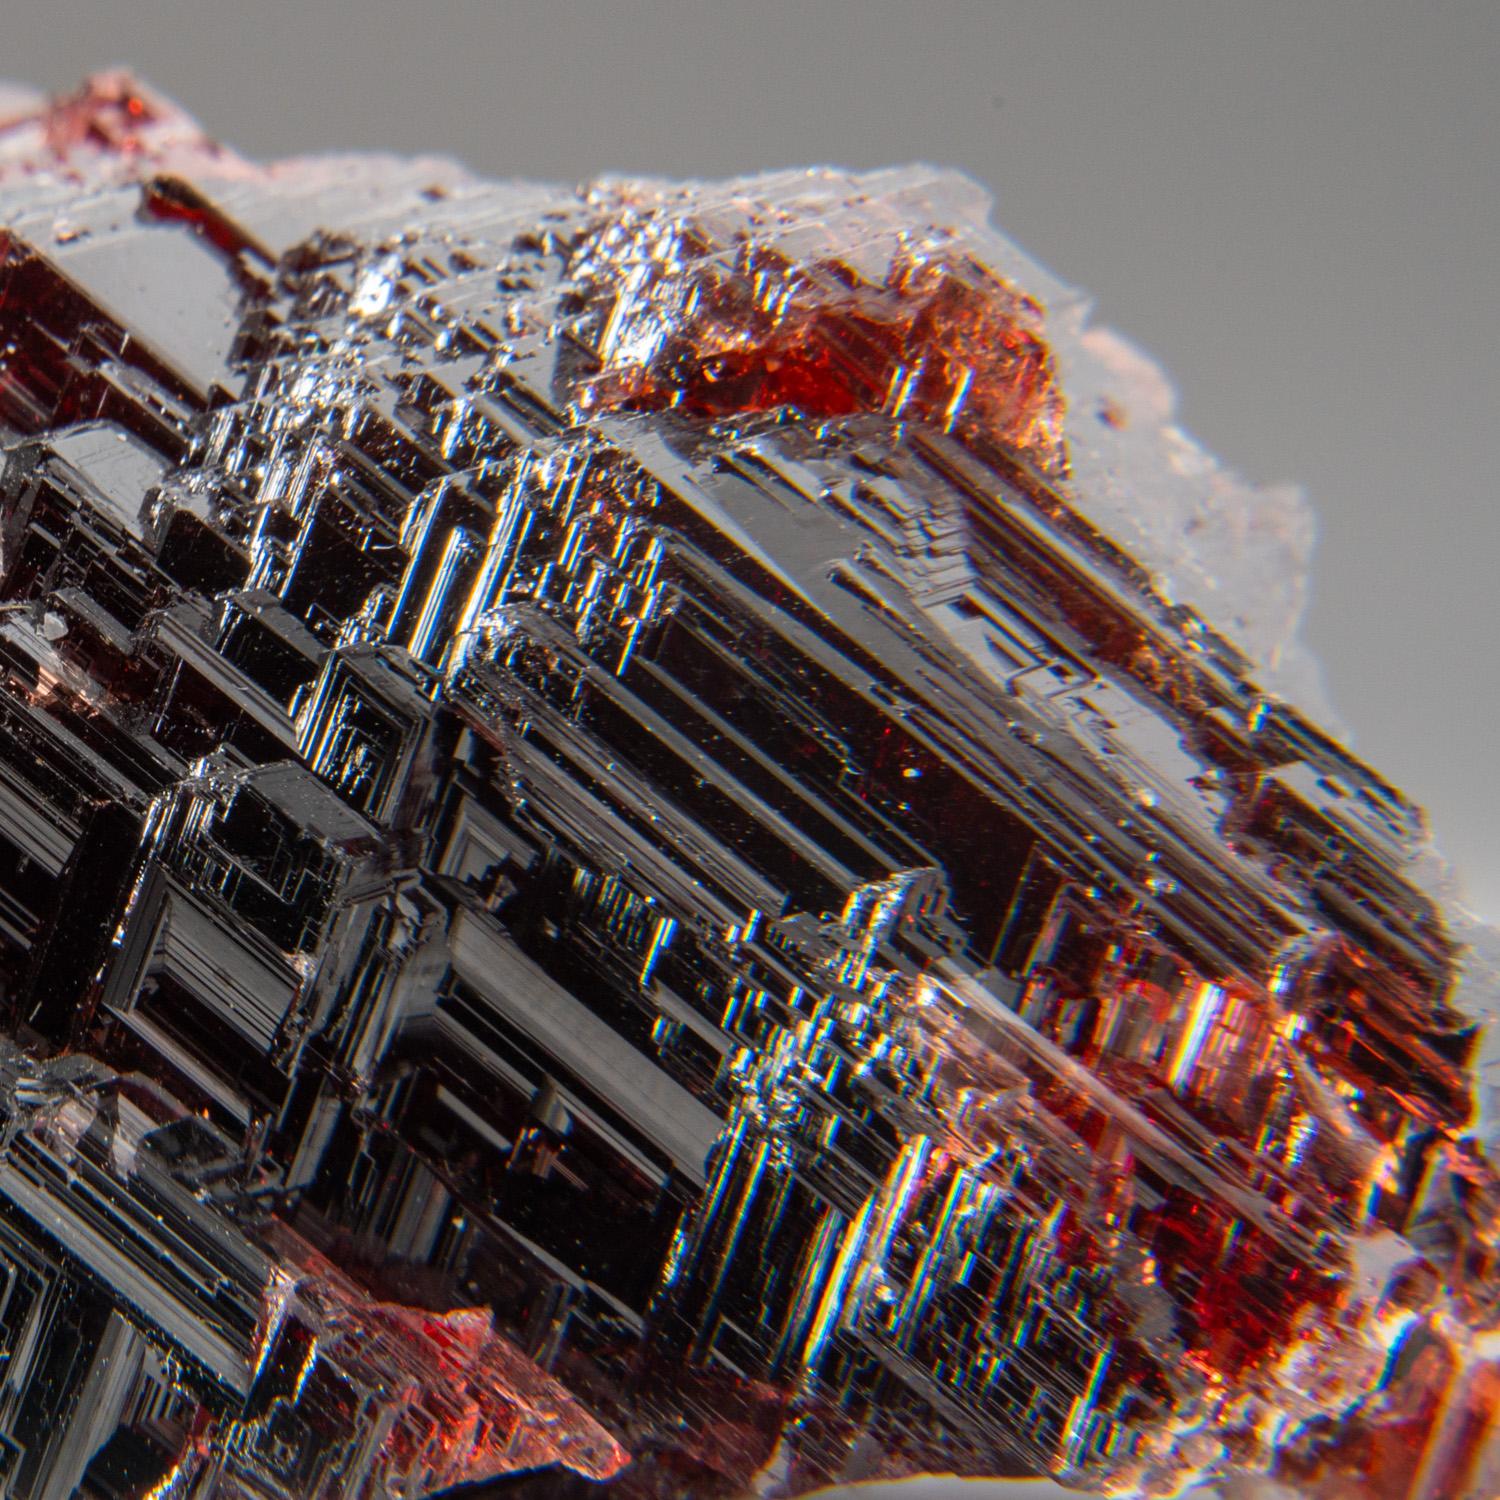 From Lavra Navegadora, Penha do Norte, Minas Gerais, Brazil

Lustrous transparent dark-red spessartine garnet crystal with irregular crystal form and surfaces composed of many parallel, stepped faces on all sides. The spessartine garnet is fully